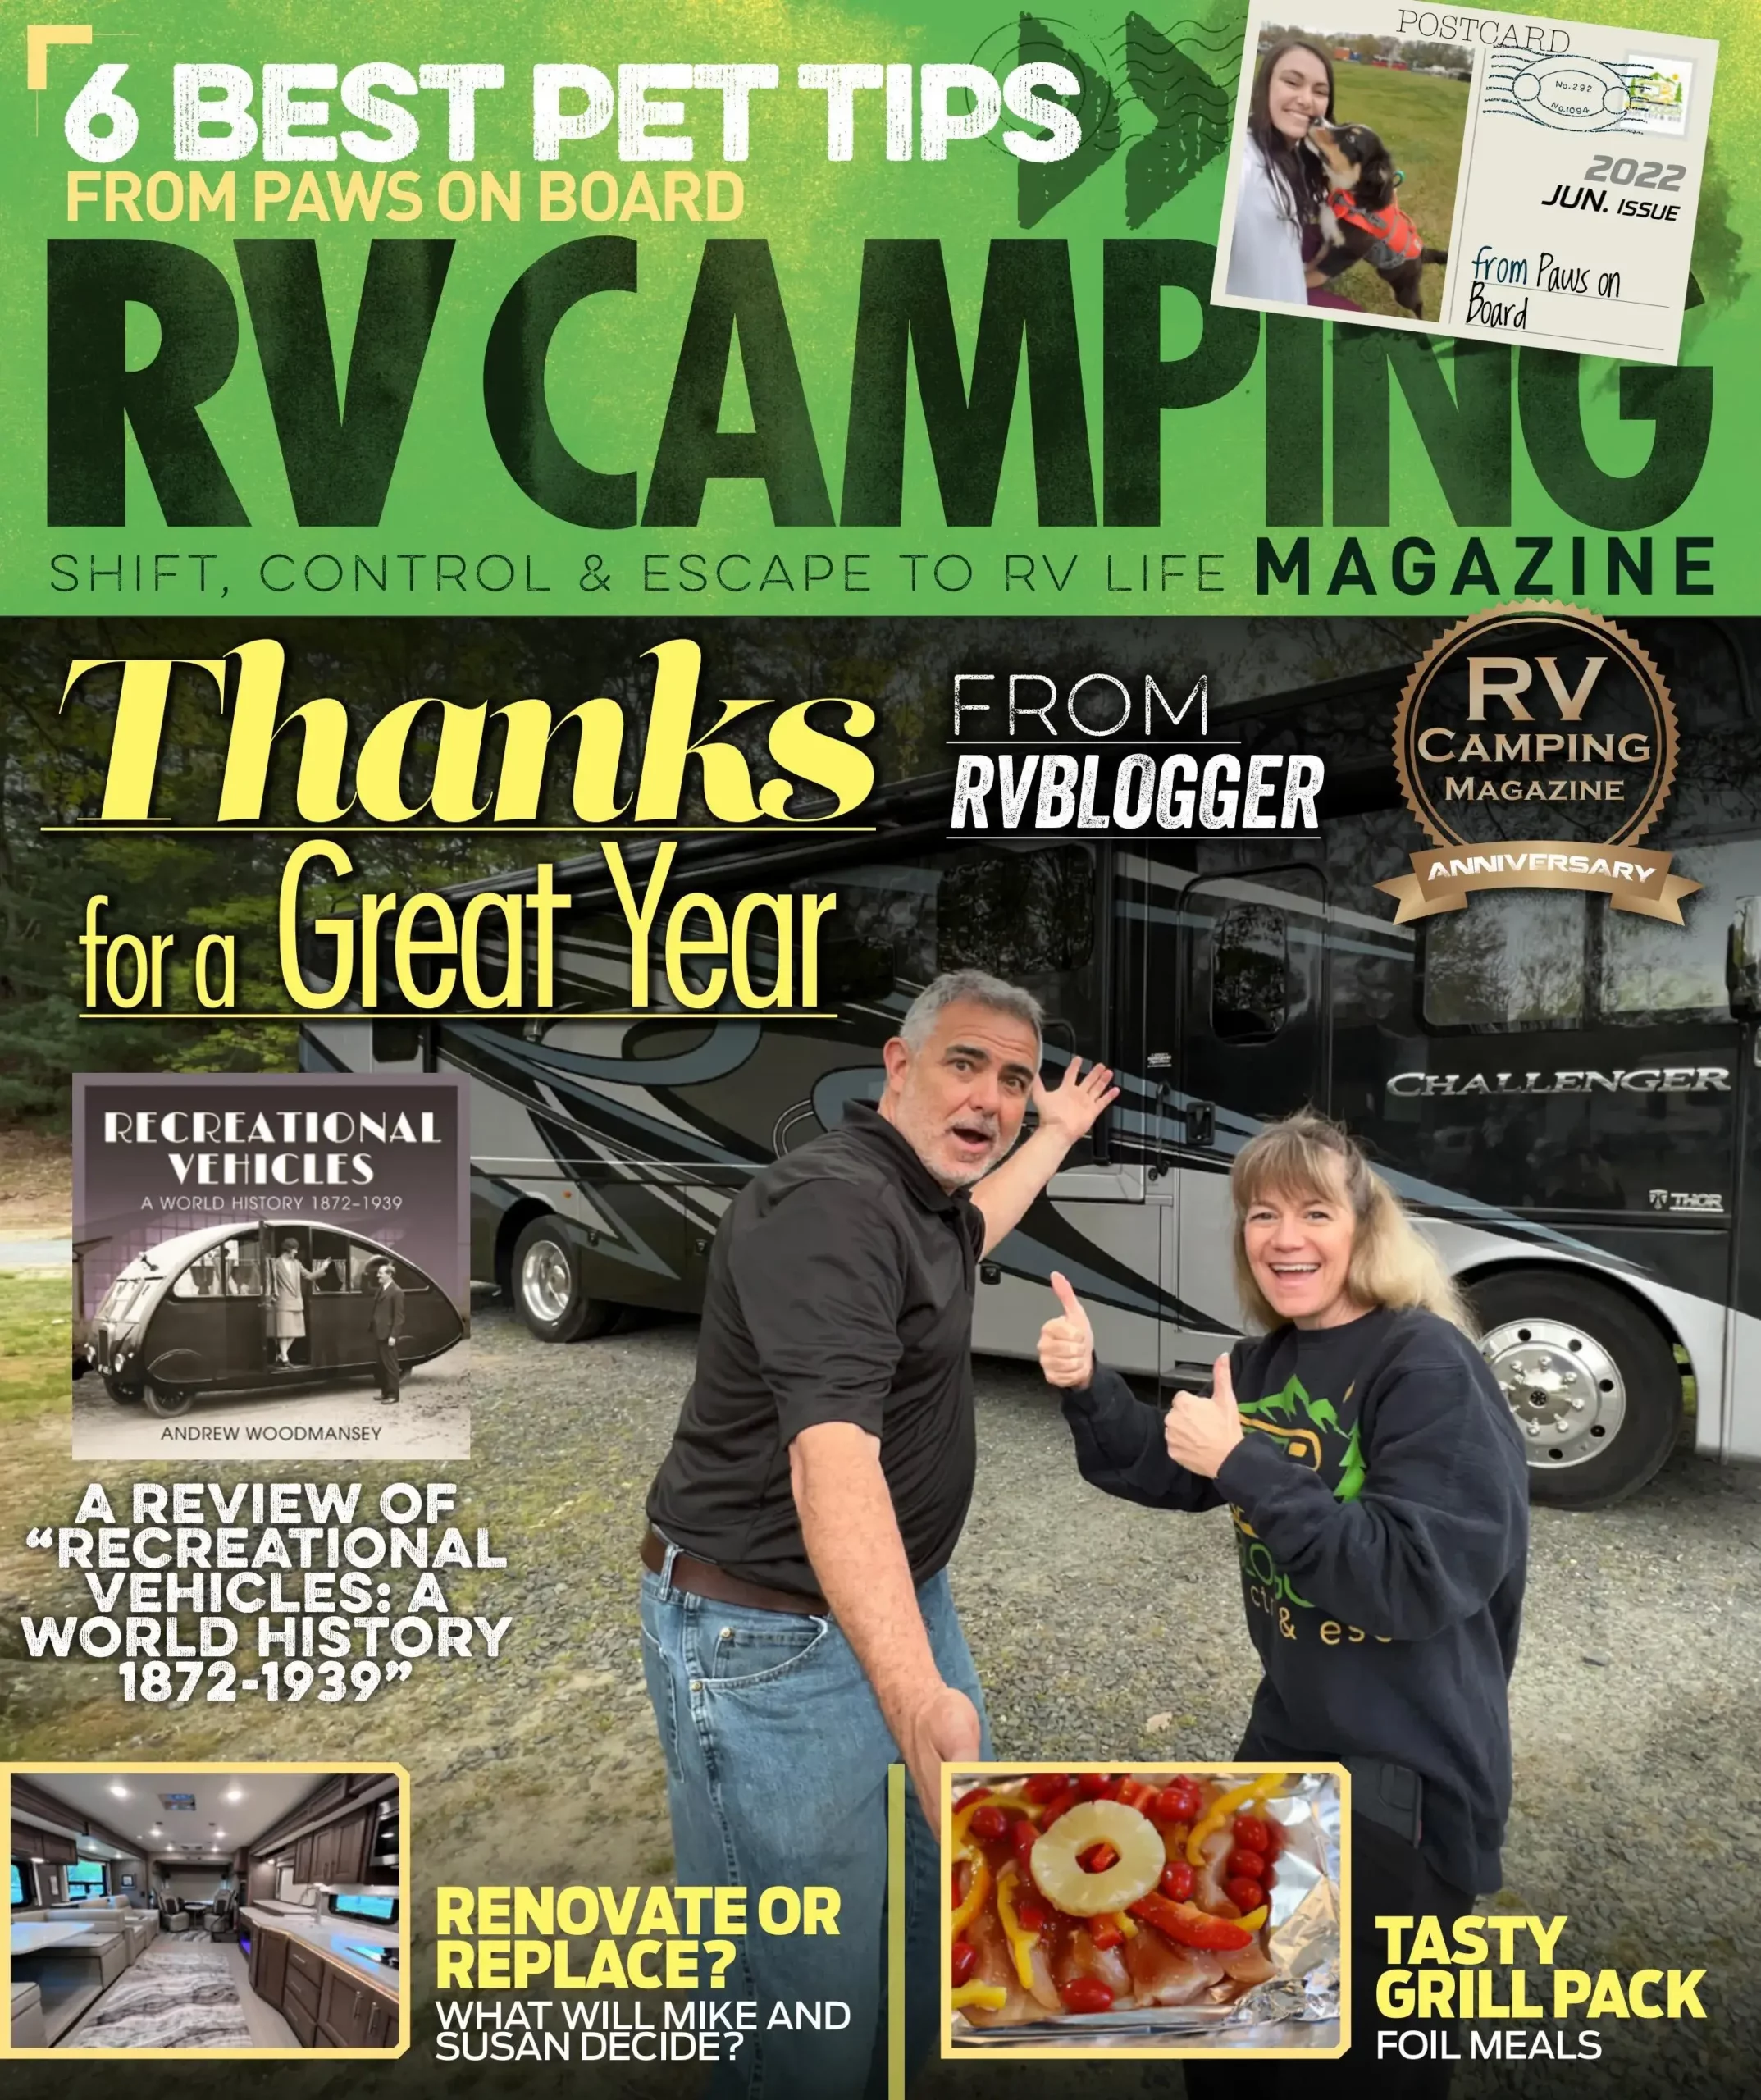 RV Camping Magazine cover celebrating a successful year.